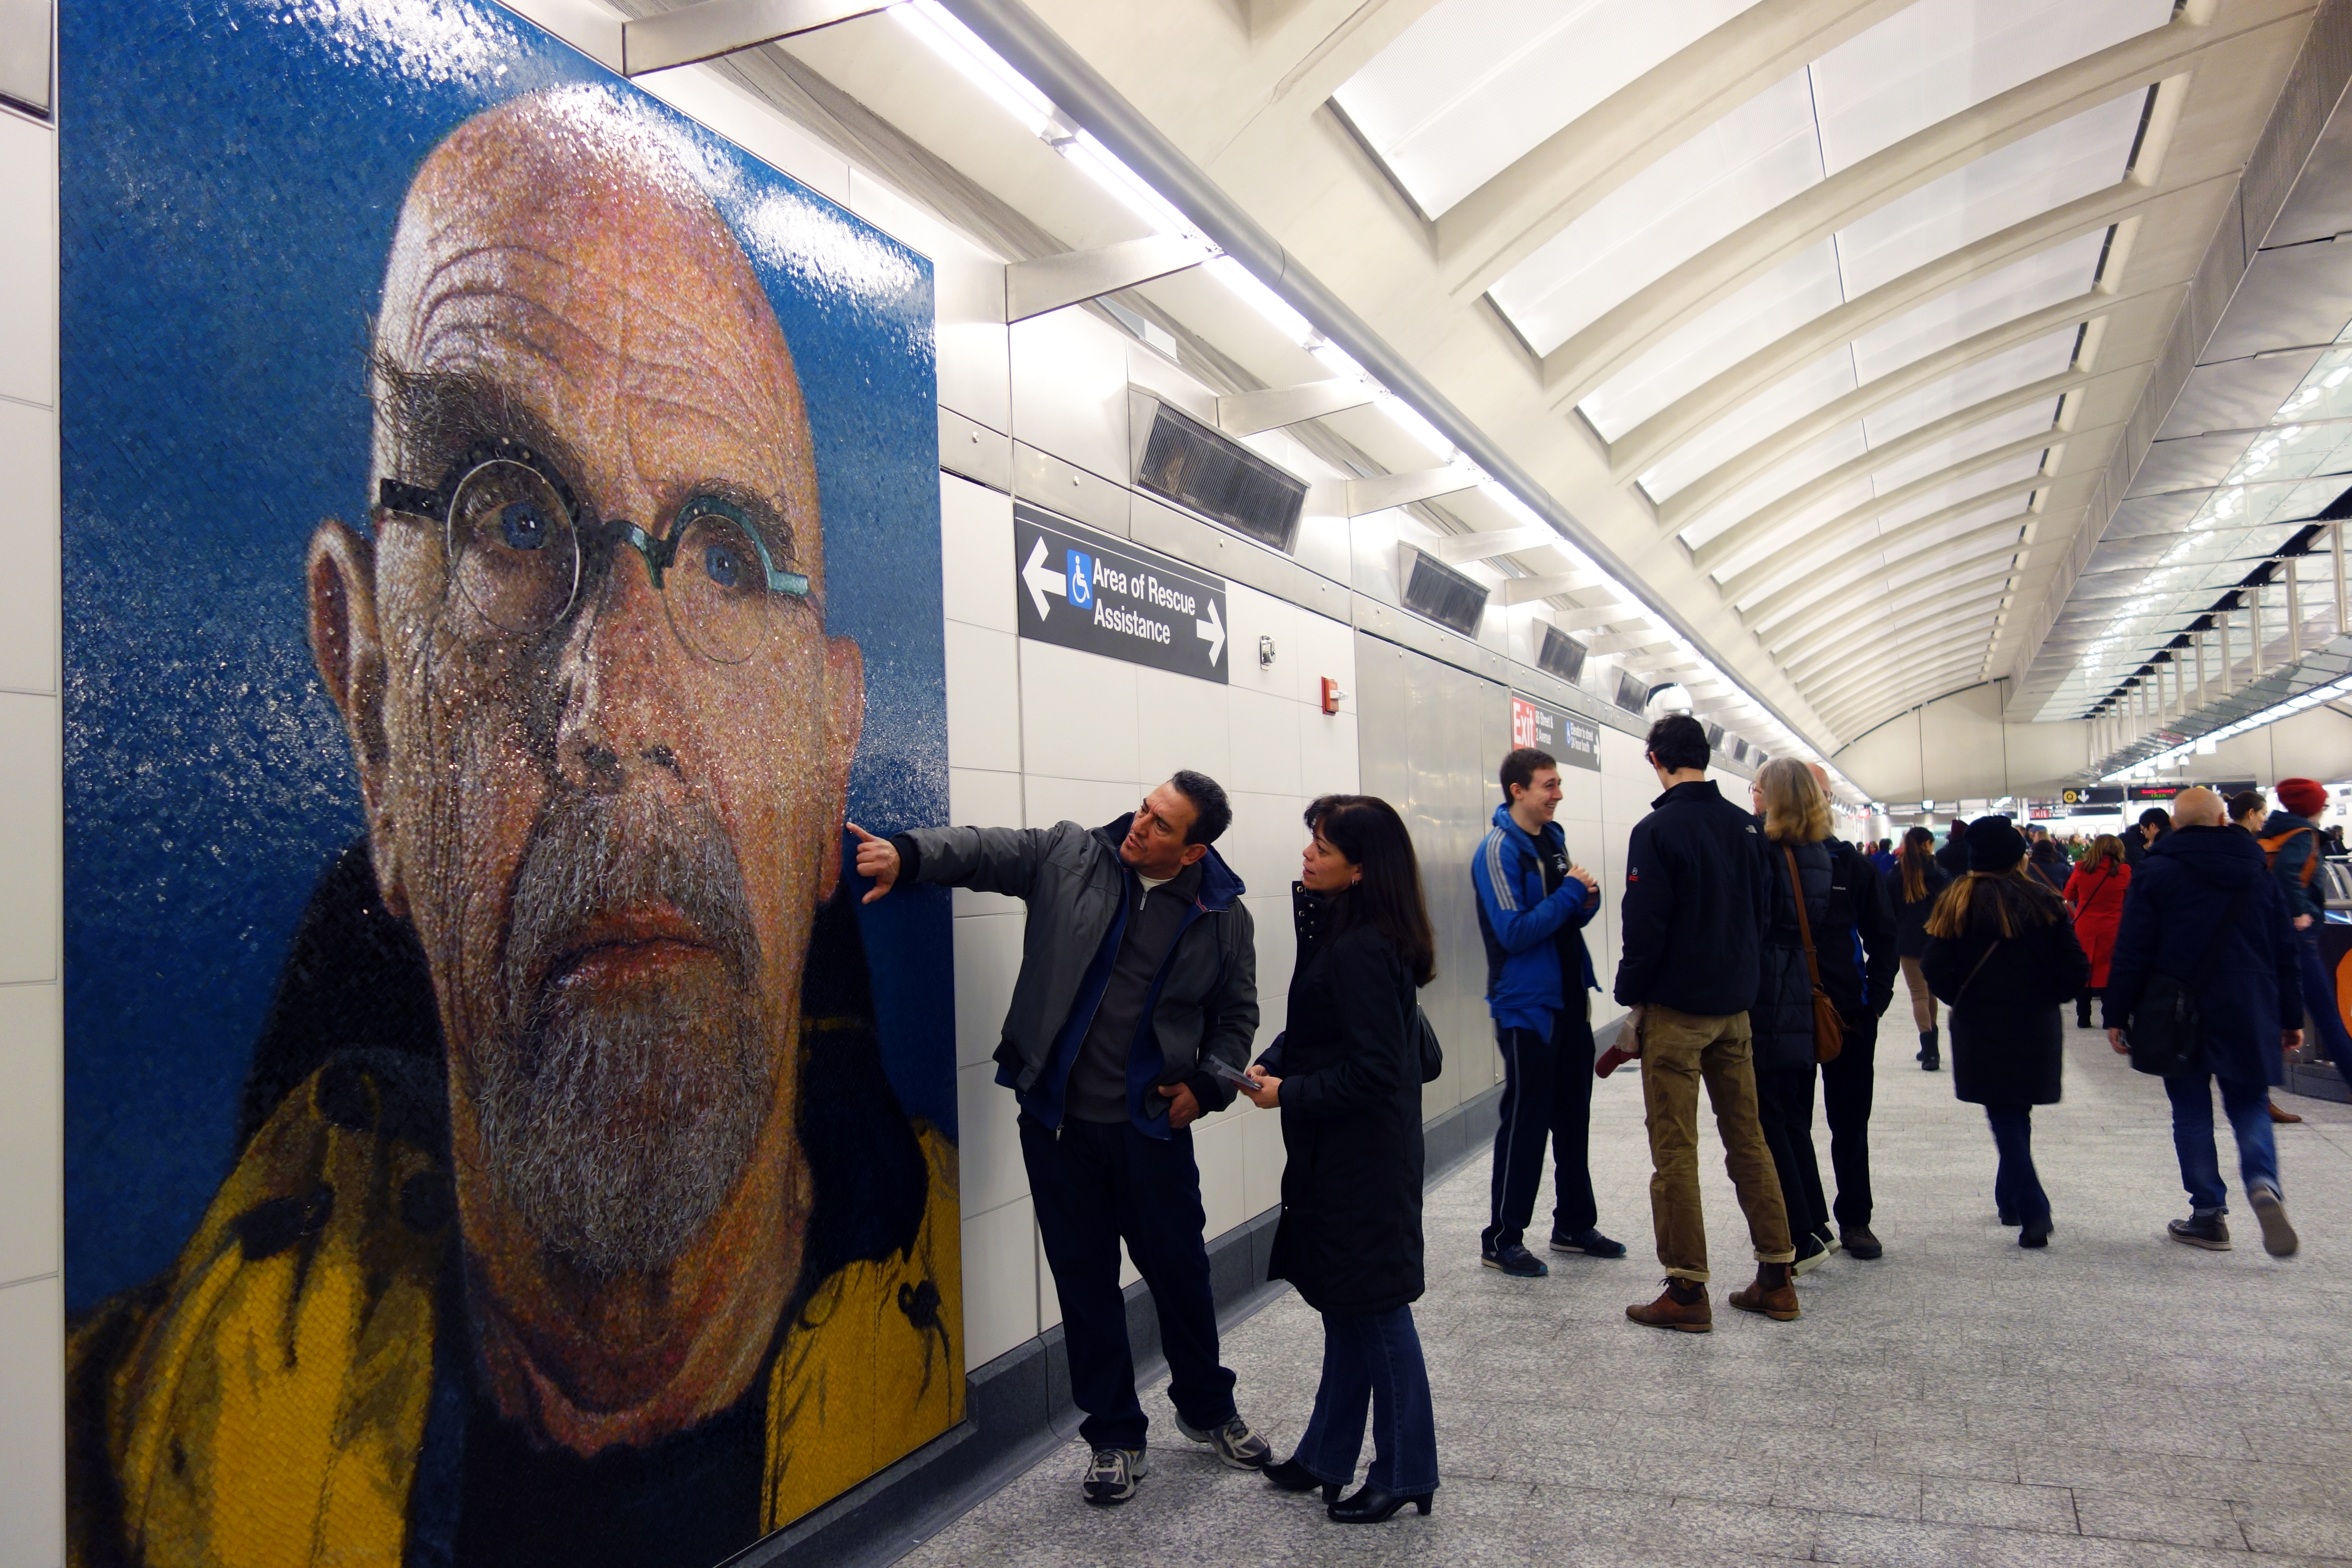 In the wake of the #MeToo movement, Hyperallergic published new allegations of sexual harassment against artist Chuck Close